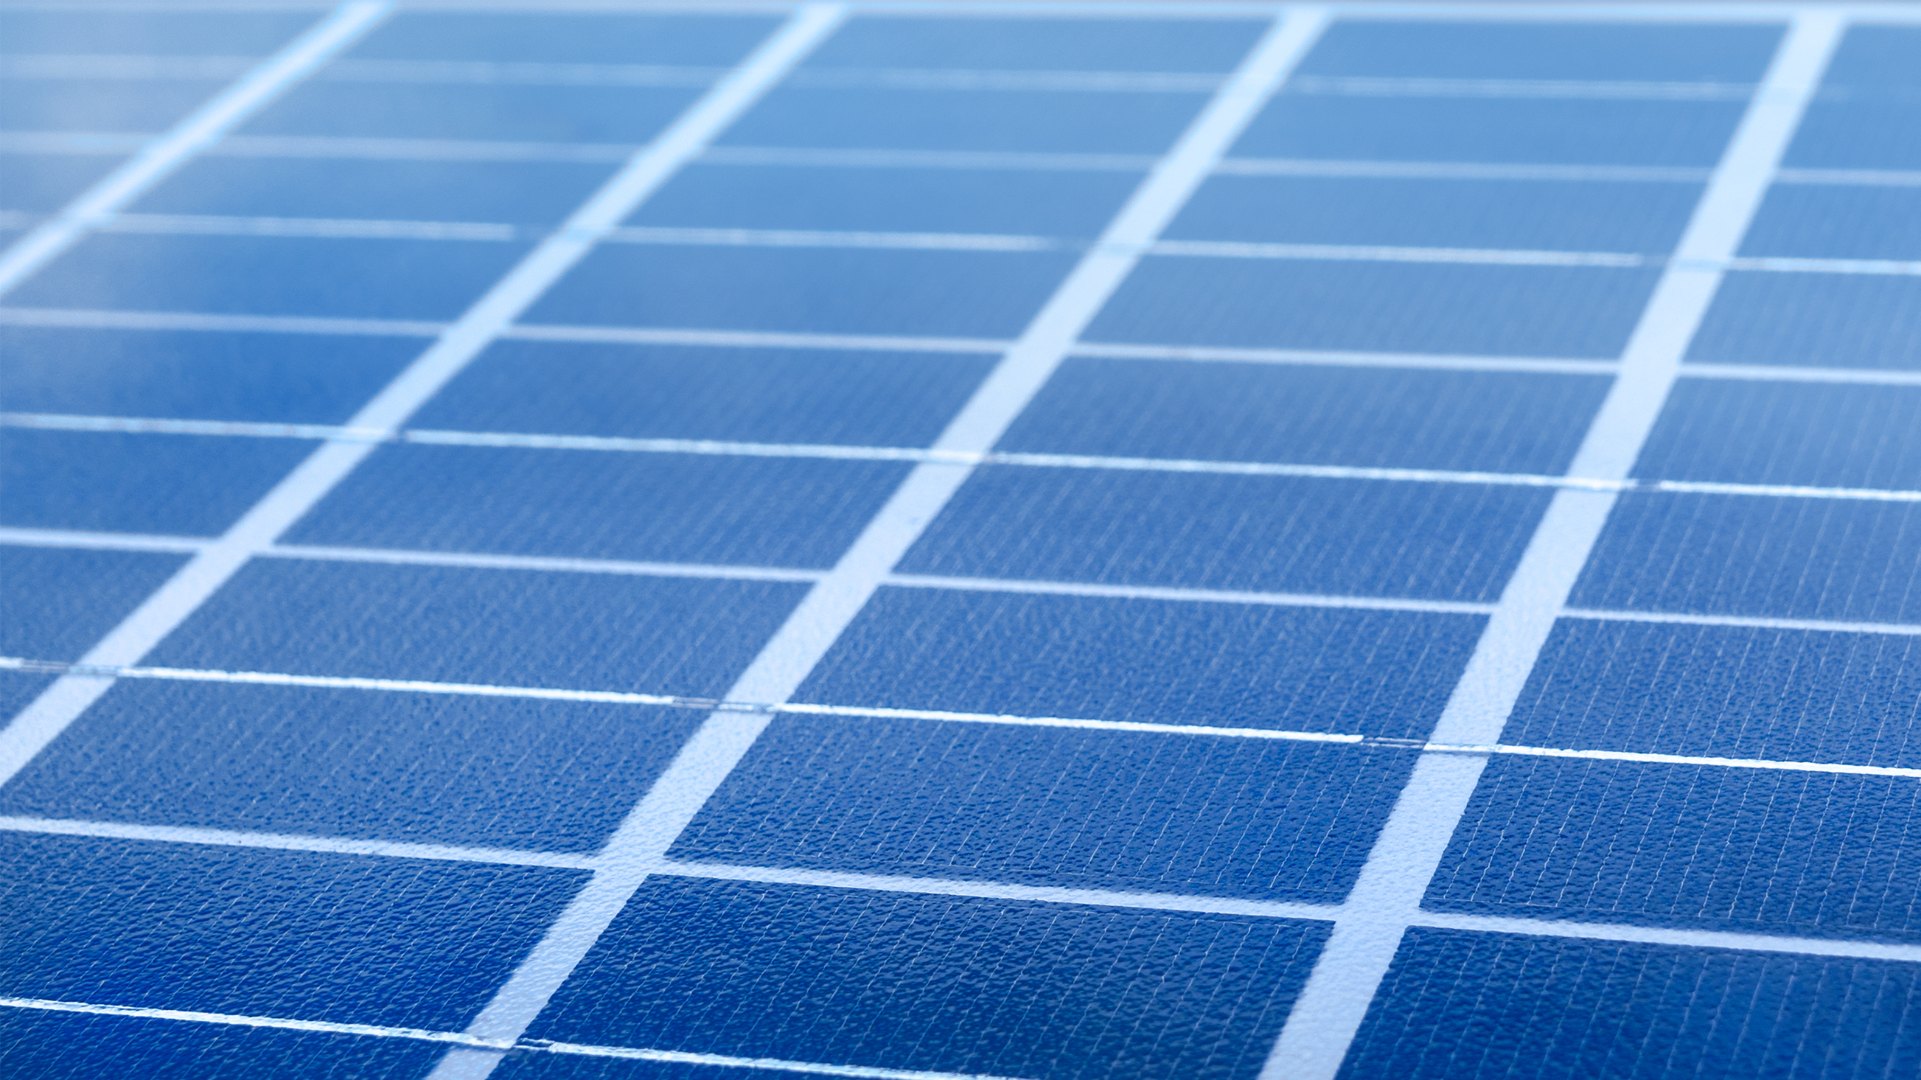 Xinyi Energy Holdings has acquired Xinyi Solar Holdings